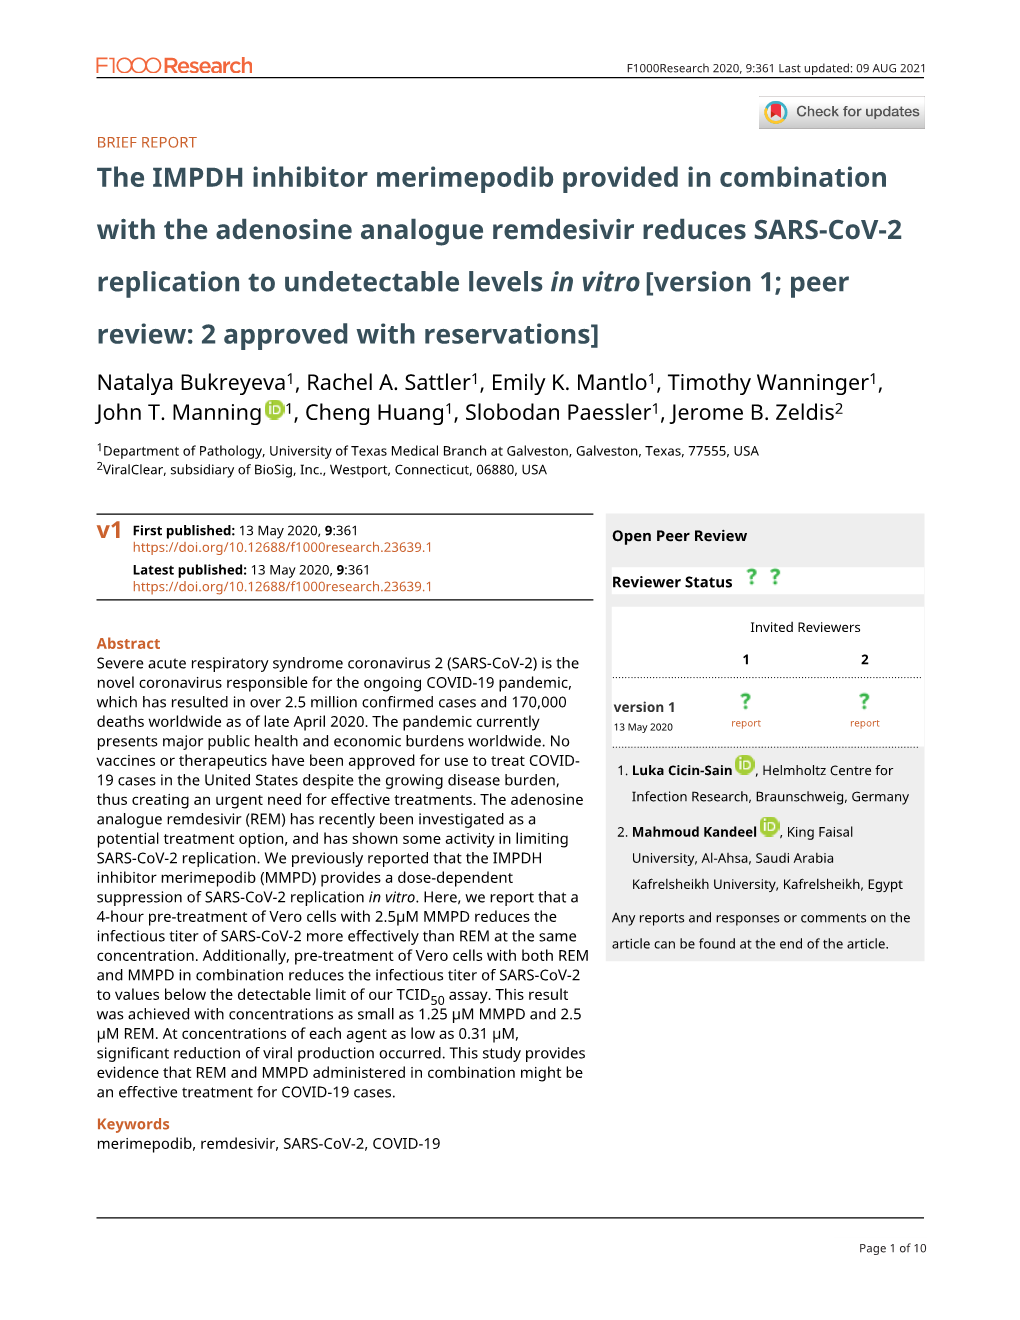 The IMPDH Inhibitor Merimepodib Provided in Combination with The